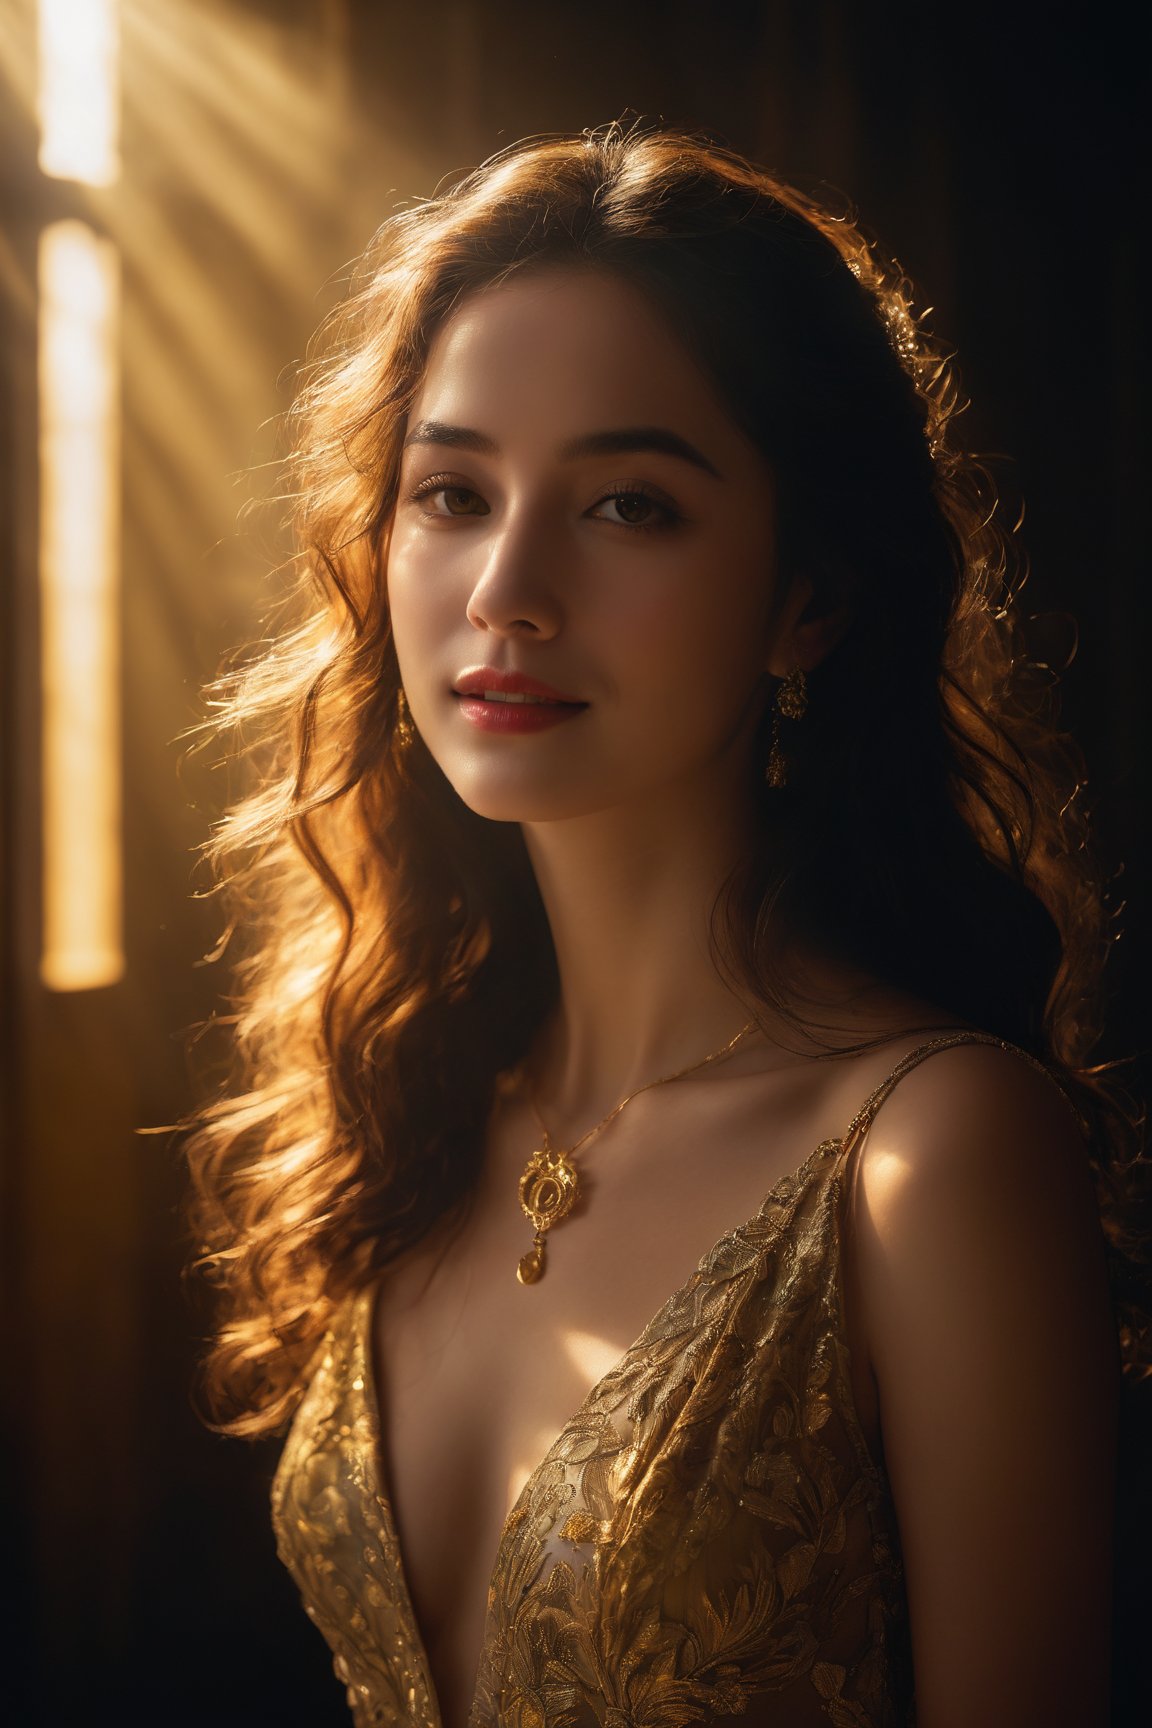 (best quality,4k,8k,highres,masterpiece:1.2),ultra-detailed,(realistic,photorealistic,photo-realistic:1.37),portrait,soft lighting,mysterious woman,smiling,curly hair,bright eyes,enchanting gaze,fog,ethereal atmosphere,golden rays,gleaming pendant necklace,wisps of hair flowing in the wind,dreamlike scenery,sensual lips,dramatic shadows,movie lights casting a dramatic effect,golden hues,subtle yellow theme,dark background,unveiling a secret,piercing gaze,beautifully haunting,contented expression